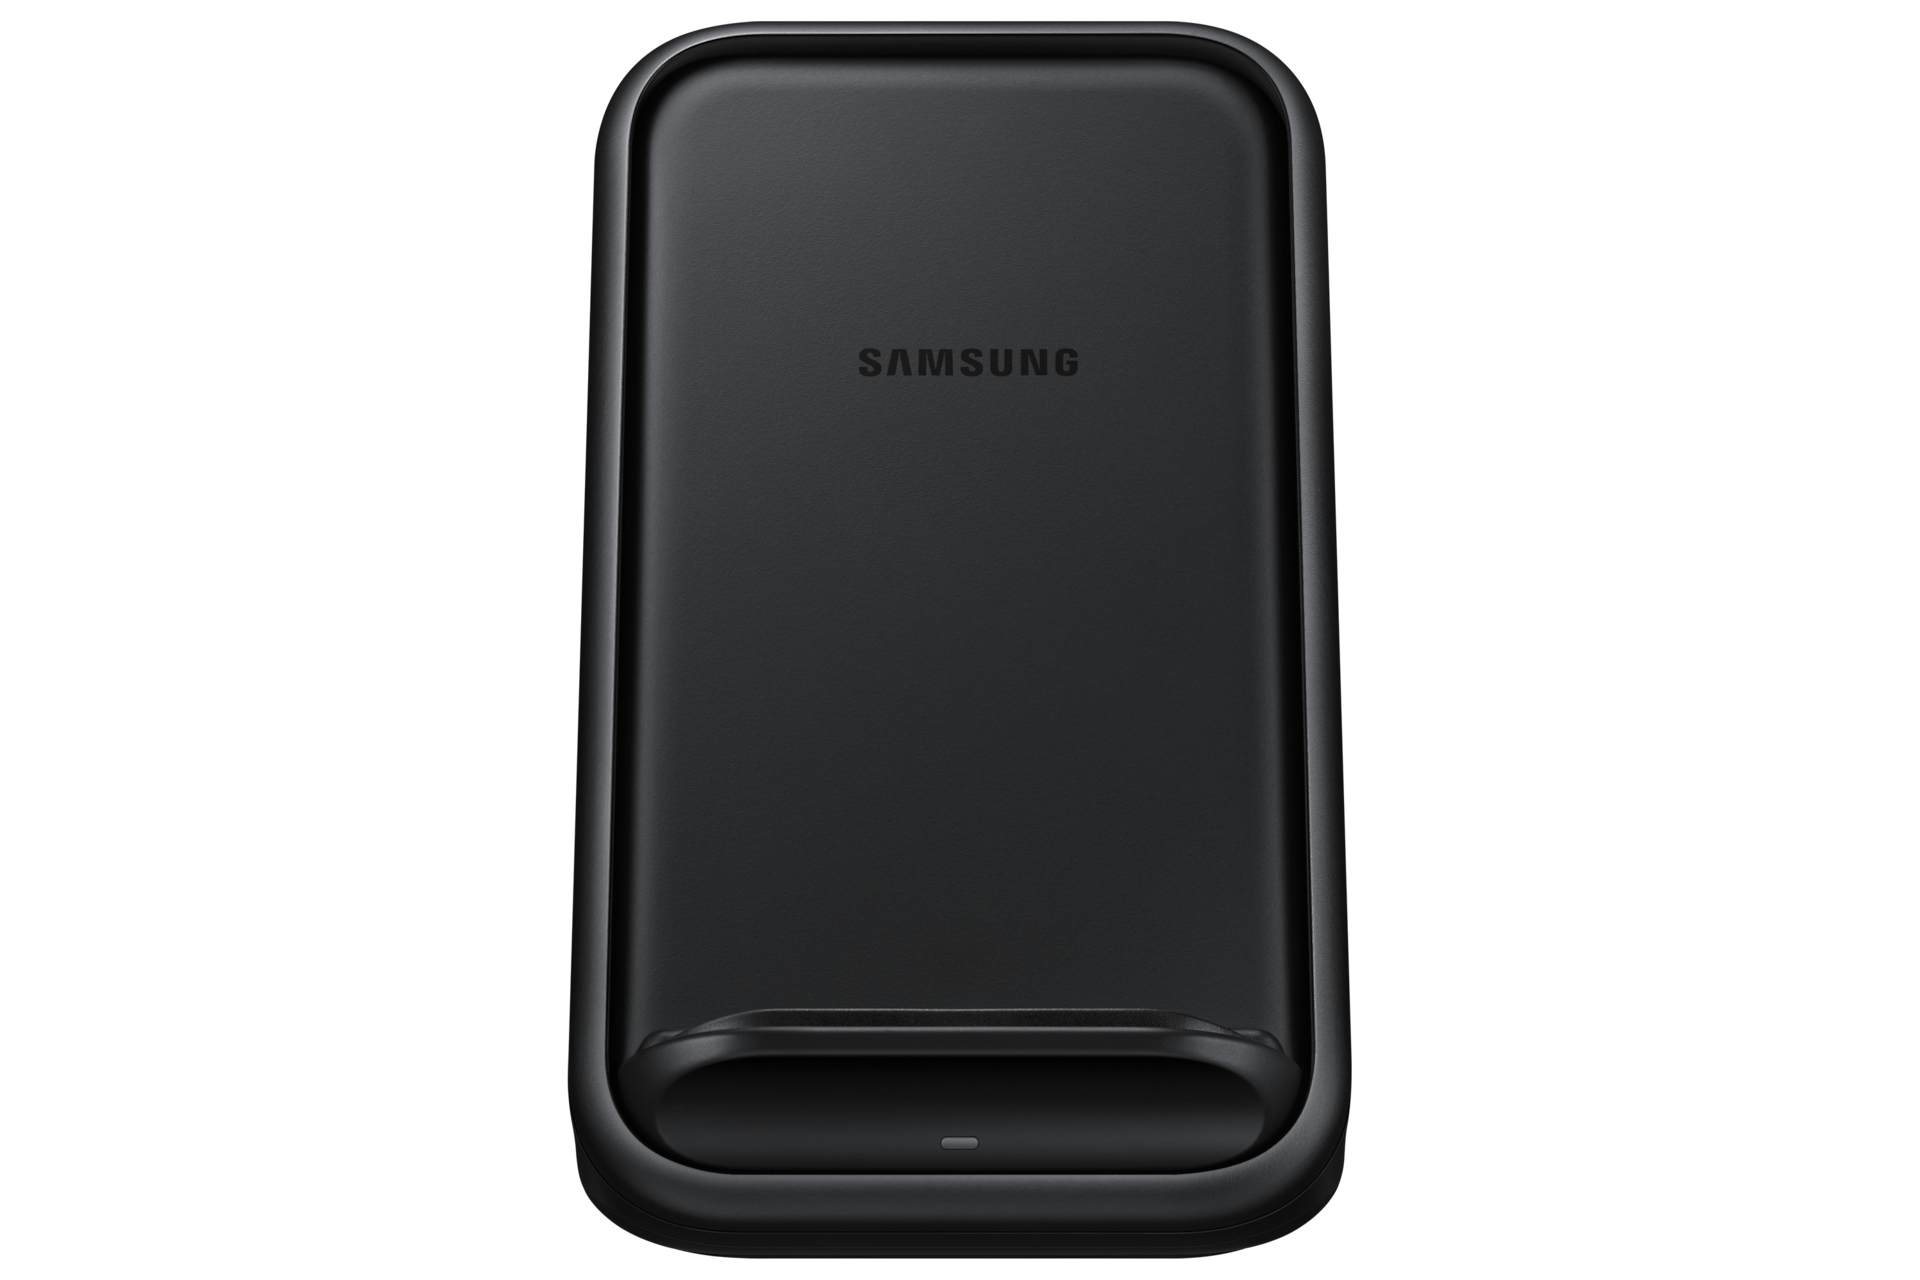 Samsung wireless charger, 15w, Portrait & Landscape Charging, comes with Built-In Cooling Fan and is Qi compatible. Buy online at Samsung Official Store.